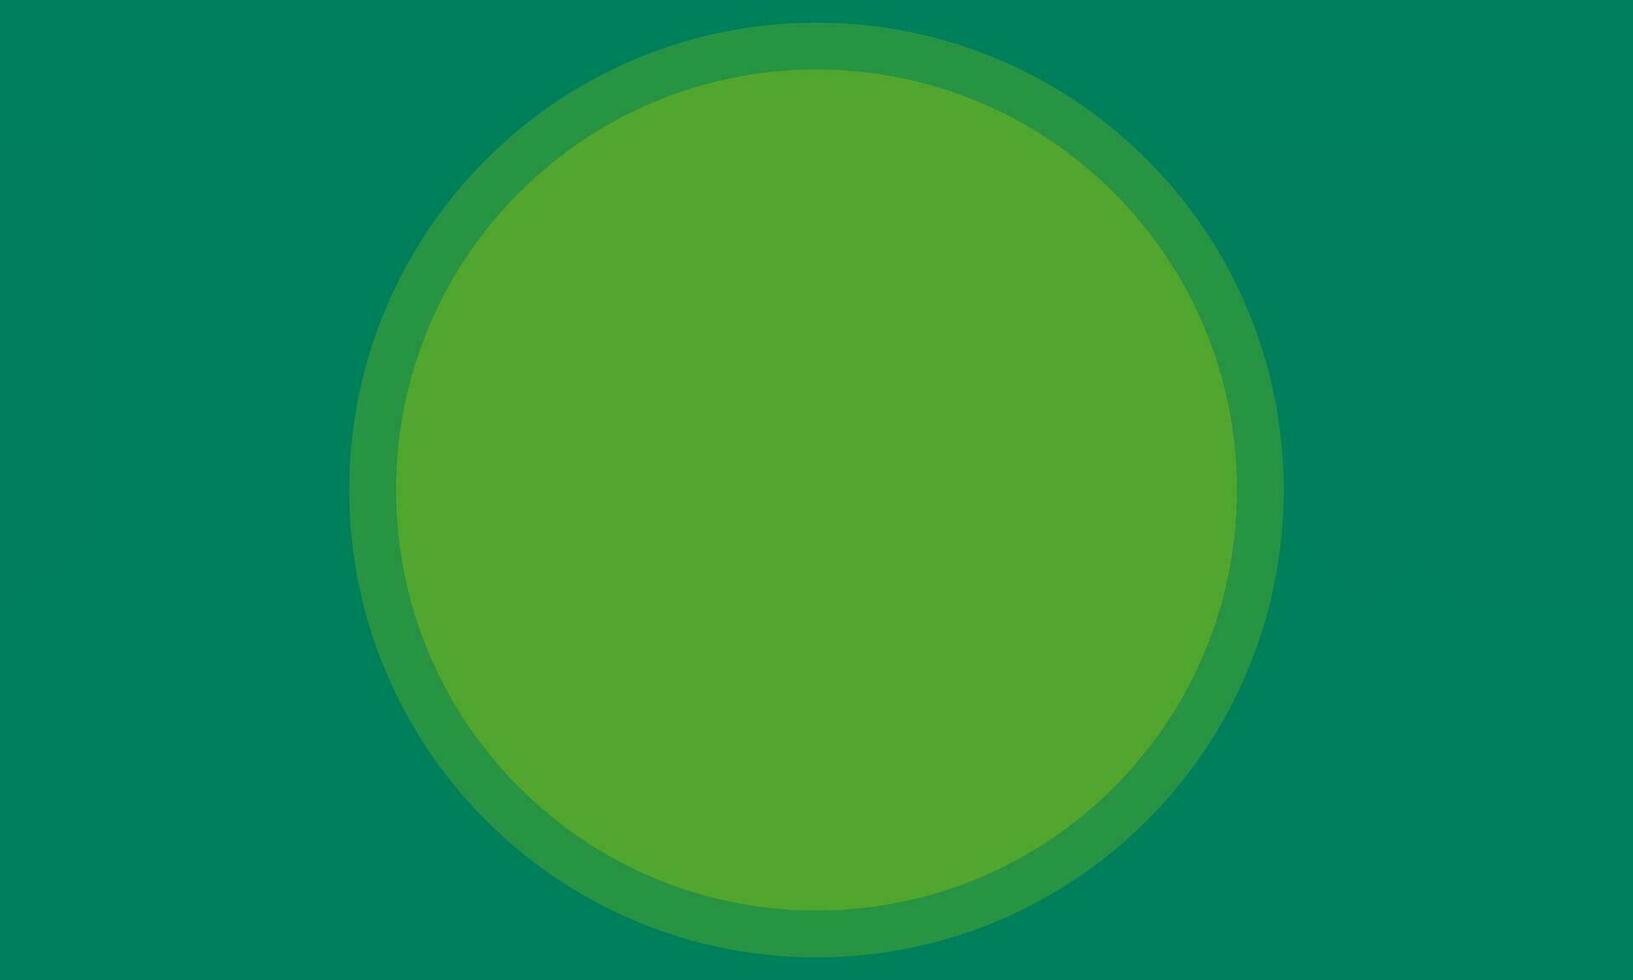 Abstract green background. Minimalistic circle green. Vector illustration